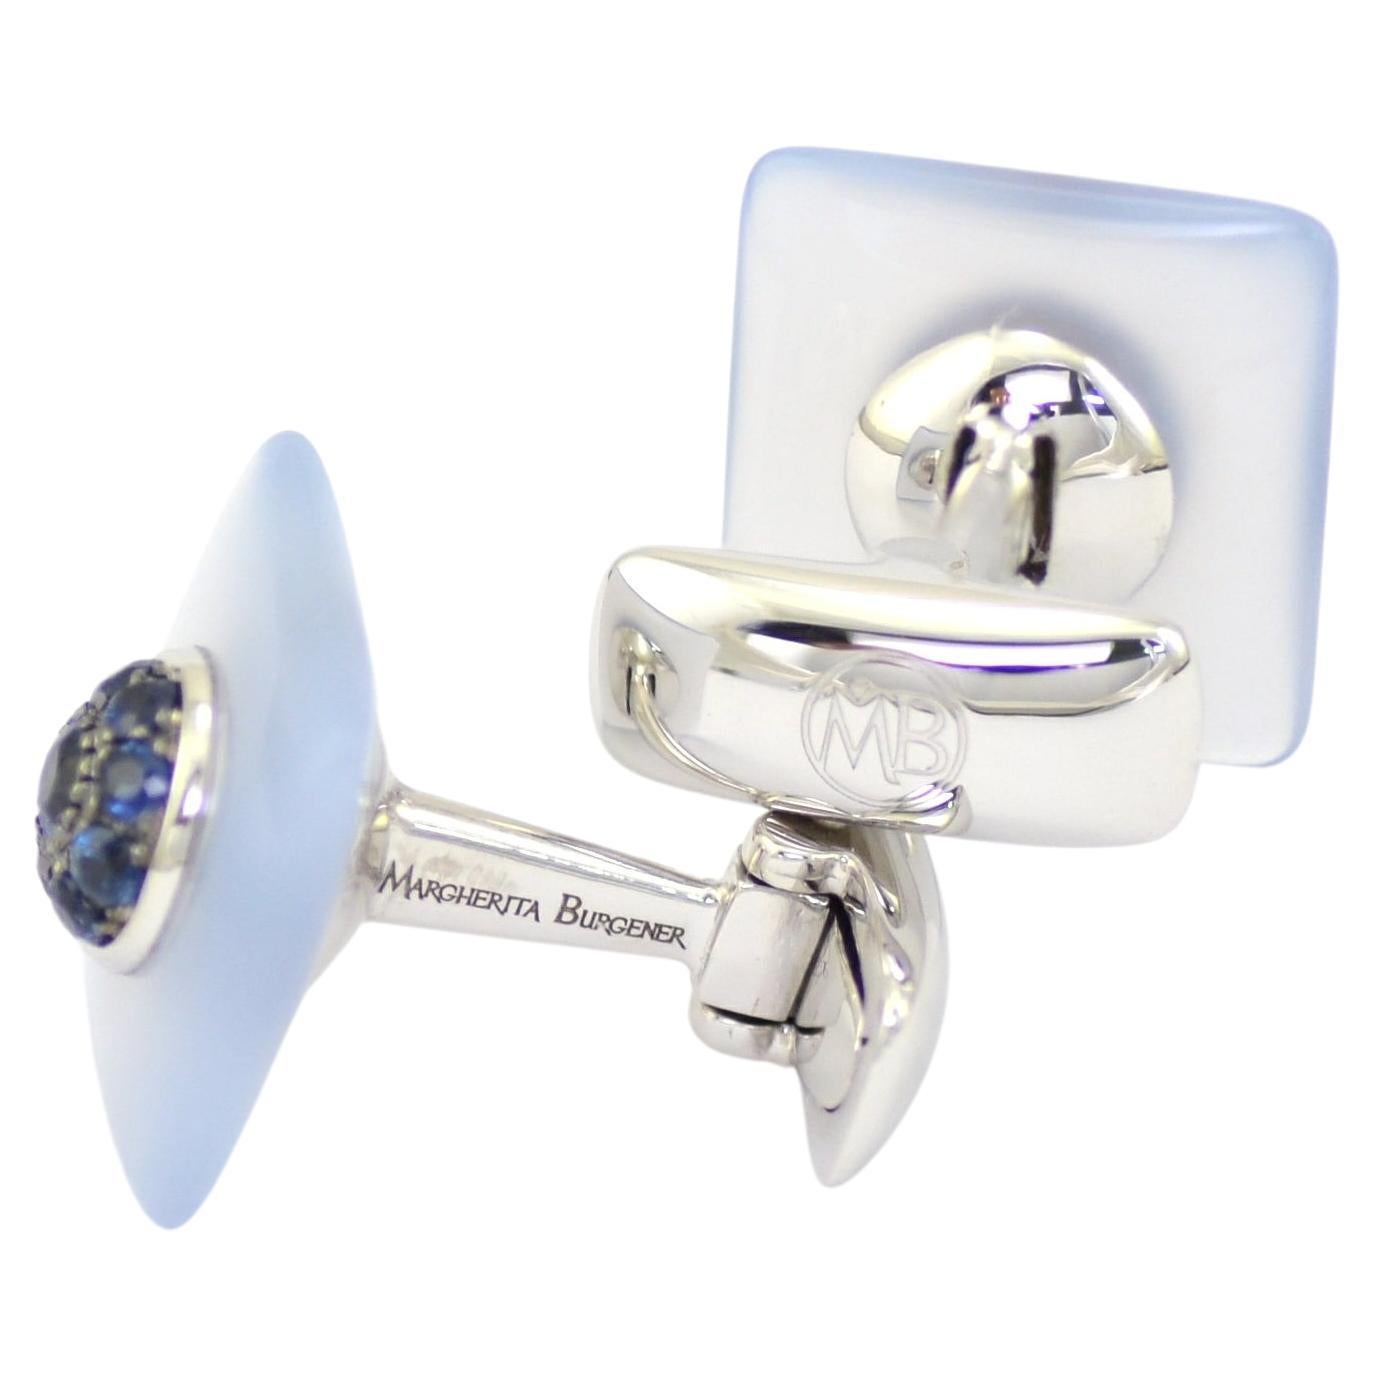 Designed and handcrafted in Margherita Burgener workshop, the refined cufflinks are realized in white gold set with blue sapphires. The light blue stone, squared shaped, slightly bombé, is natural chalcedony. It is a unisex piece of jewelry.
They